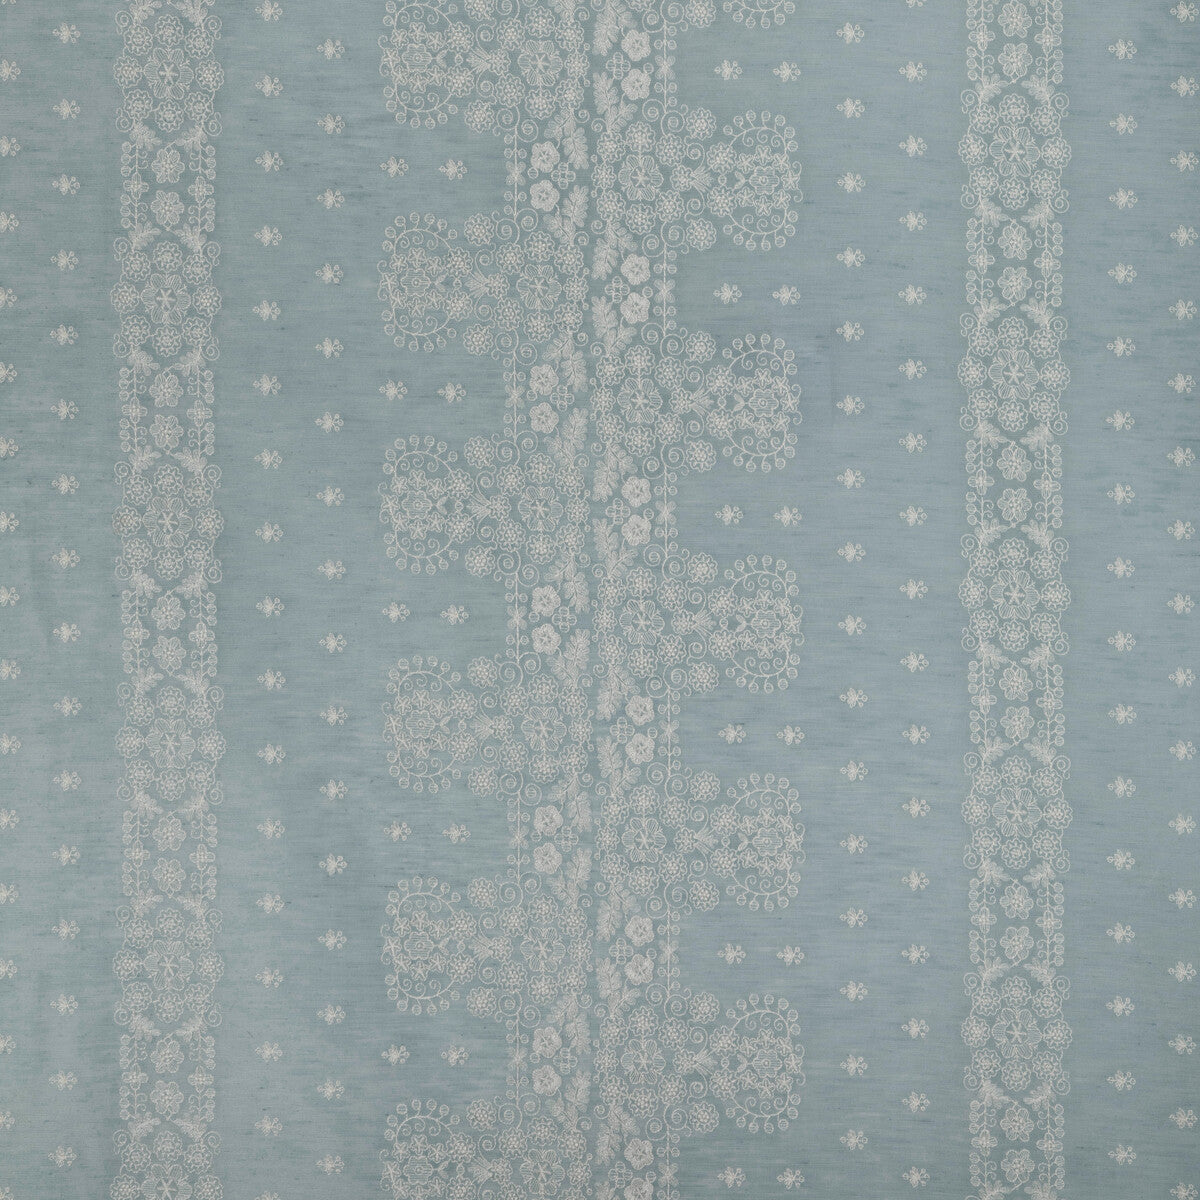 Coulet Sheer fabric in sky color - pattern 8023109.15.0 - by Brunschwig &amp; Fils in the Anduze Embroideries collection